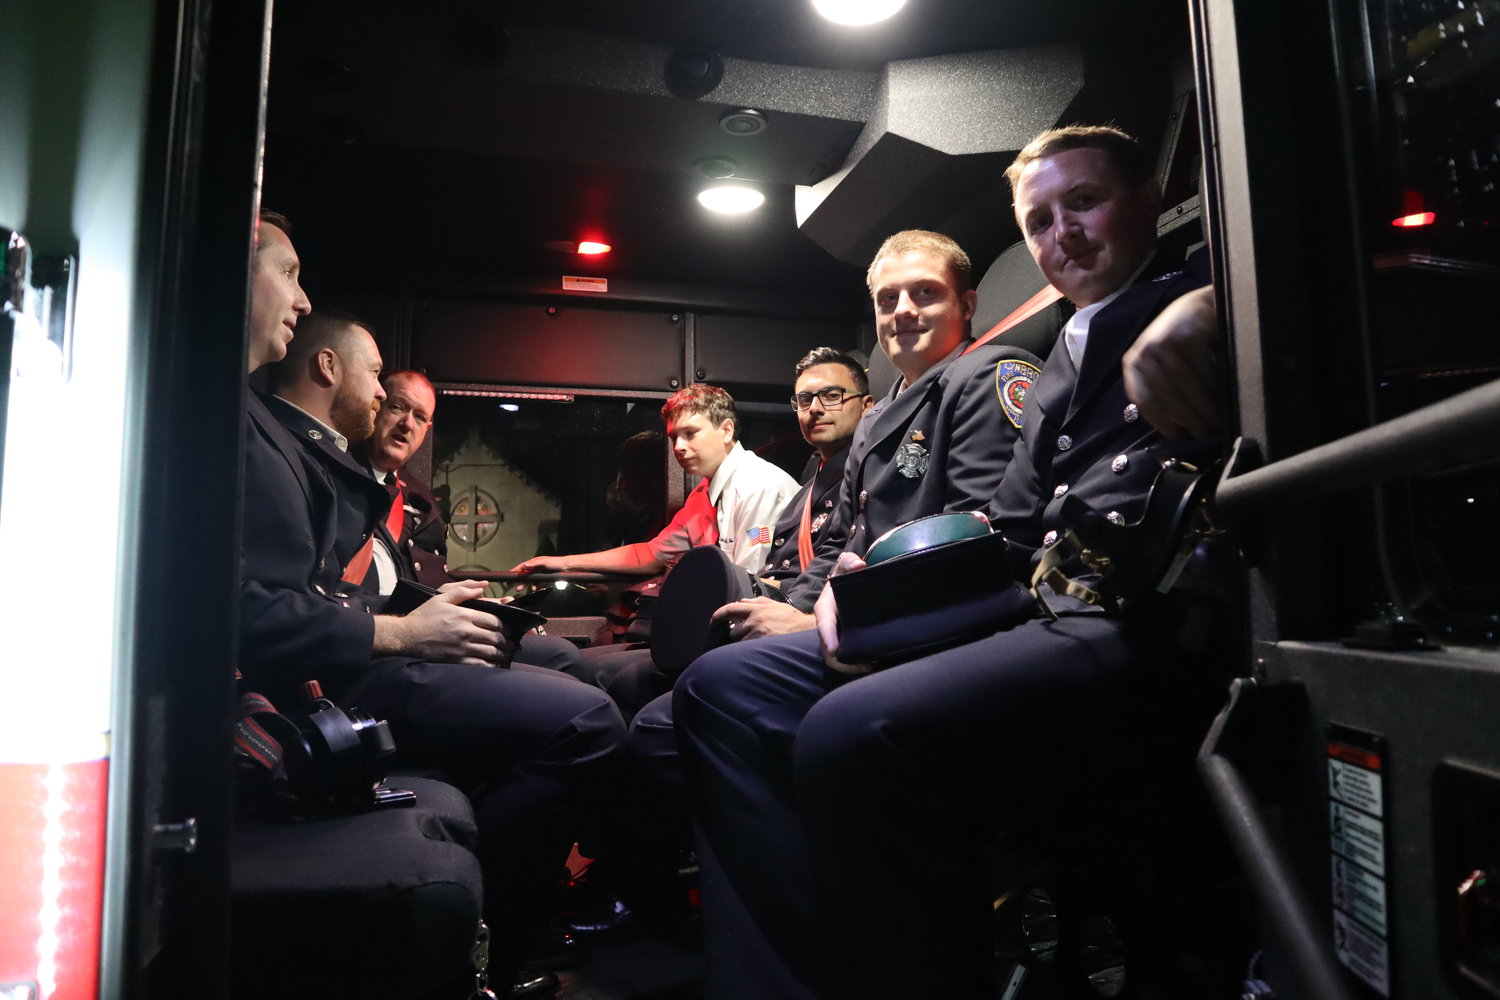 Lynbrook Fire Department’s Engine Company No. 1 strap themselves into the truck following the 9/11 ceremony.